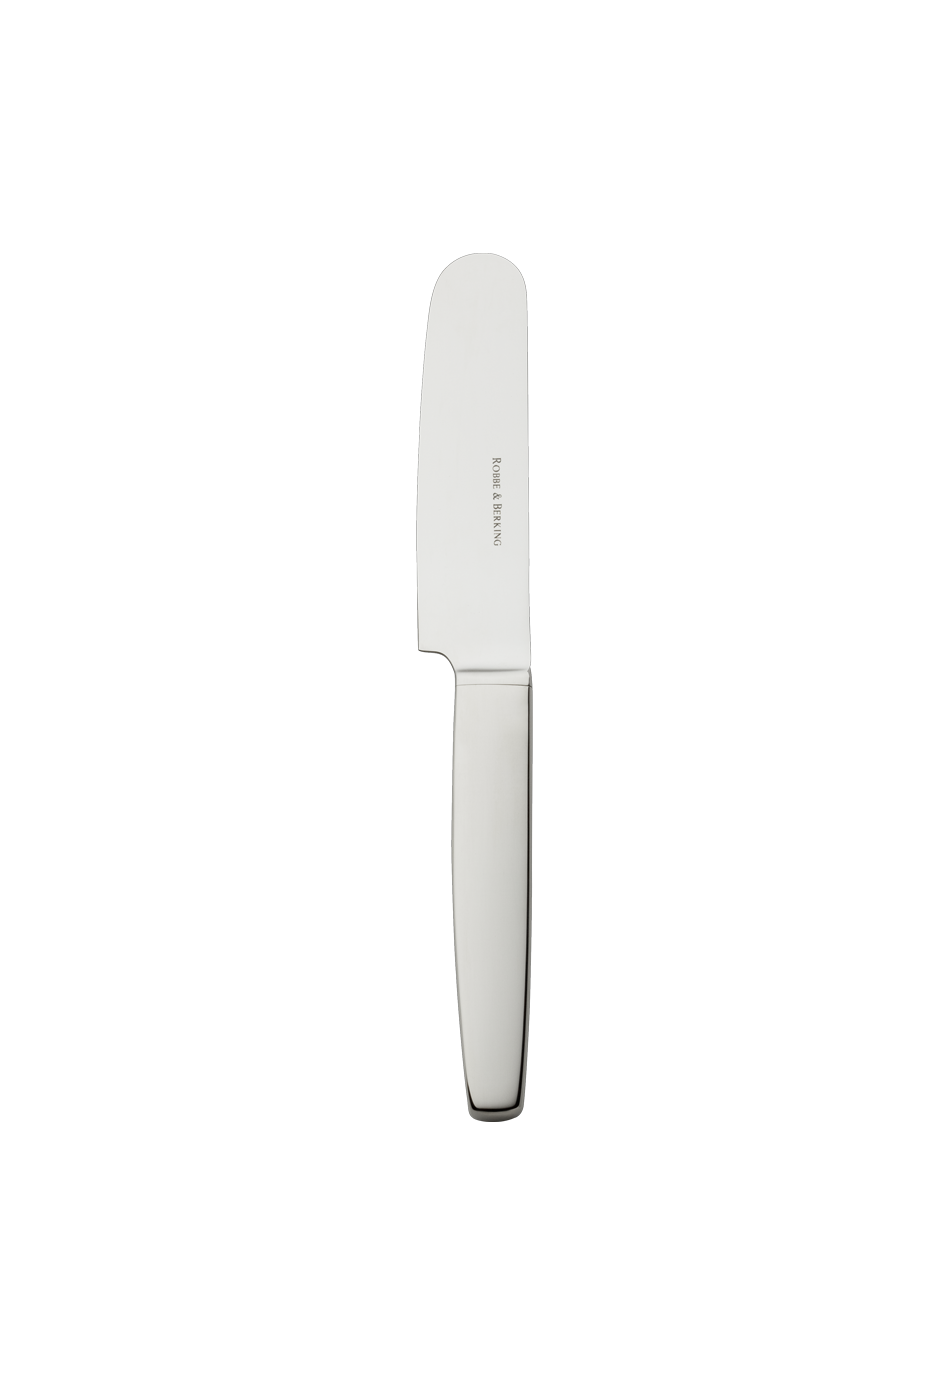 Pax Butter Knife (18/8 stainless steel)